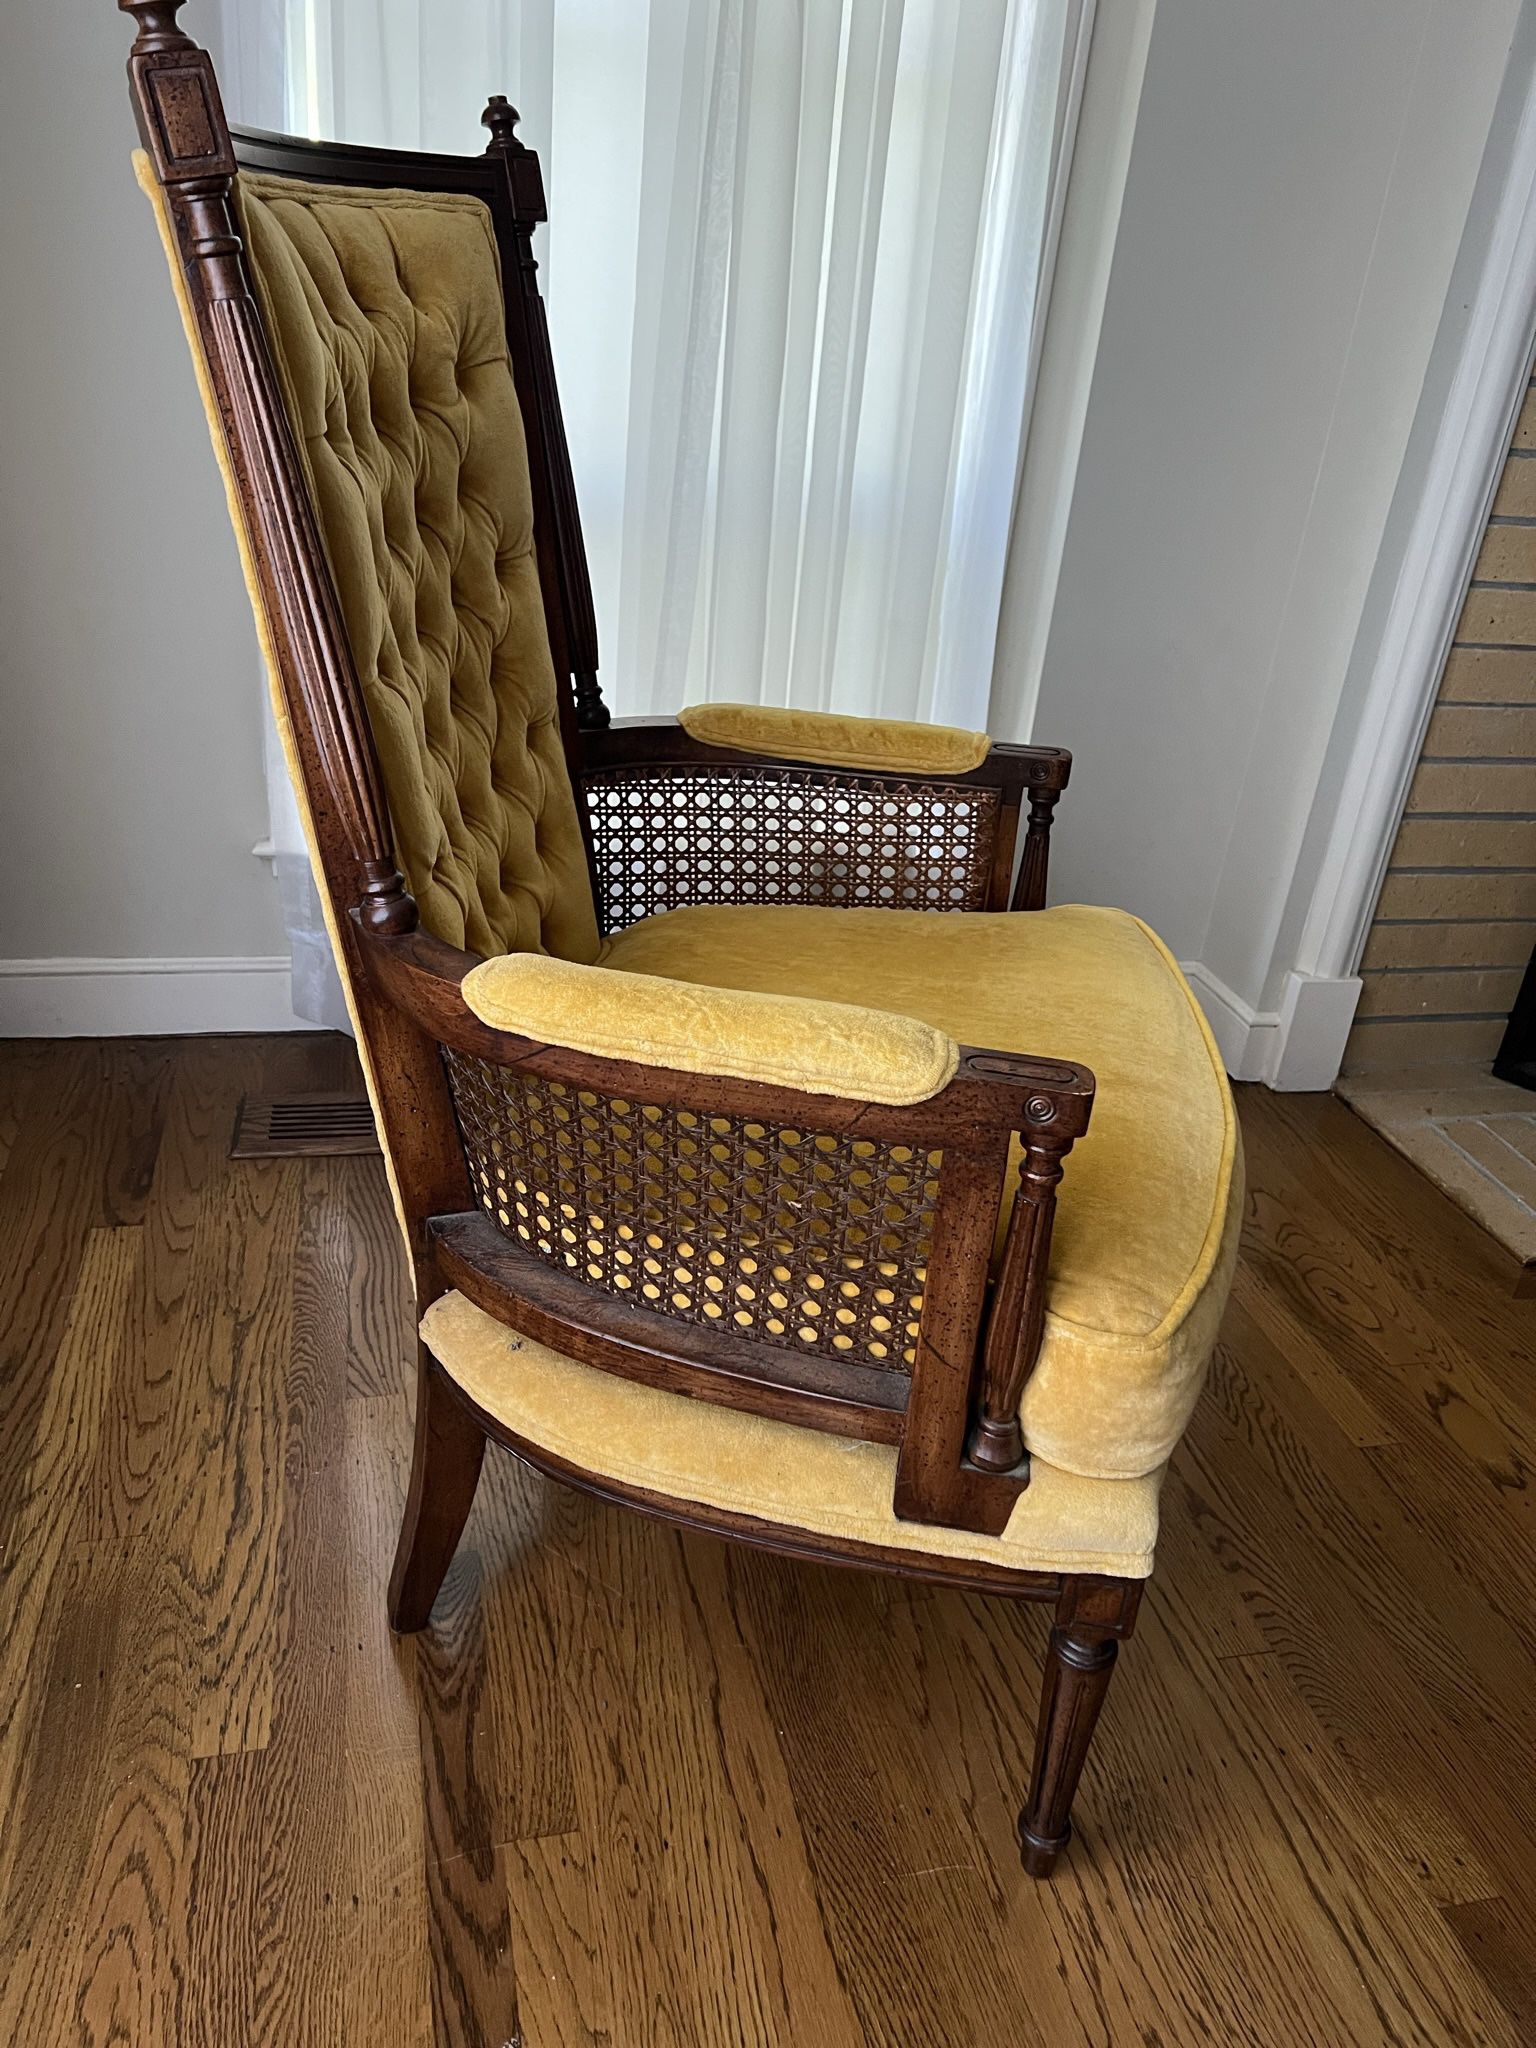 Vintage library chair